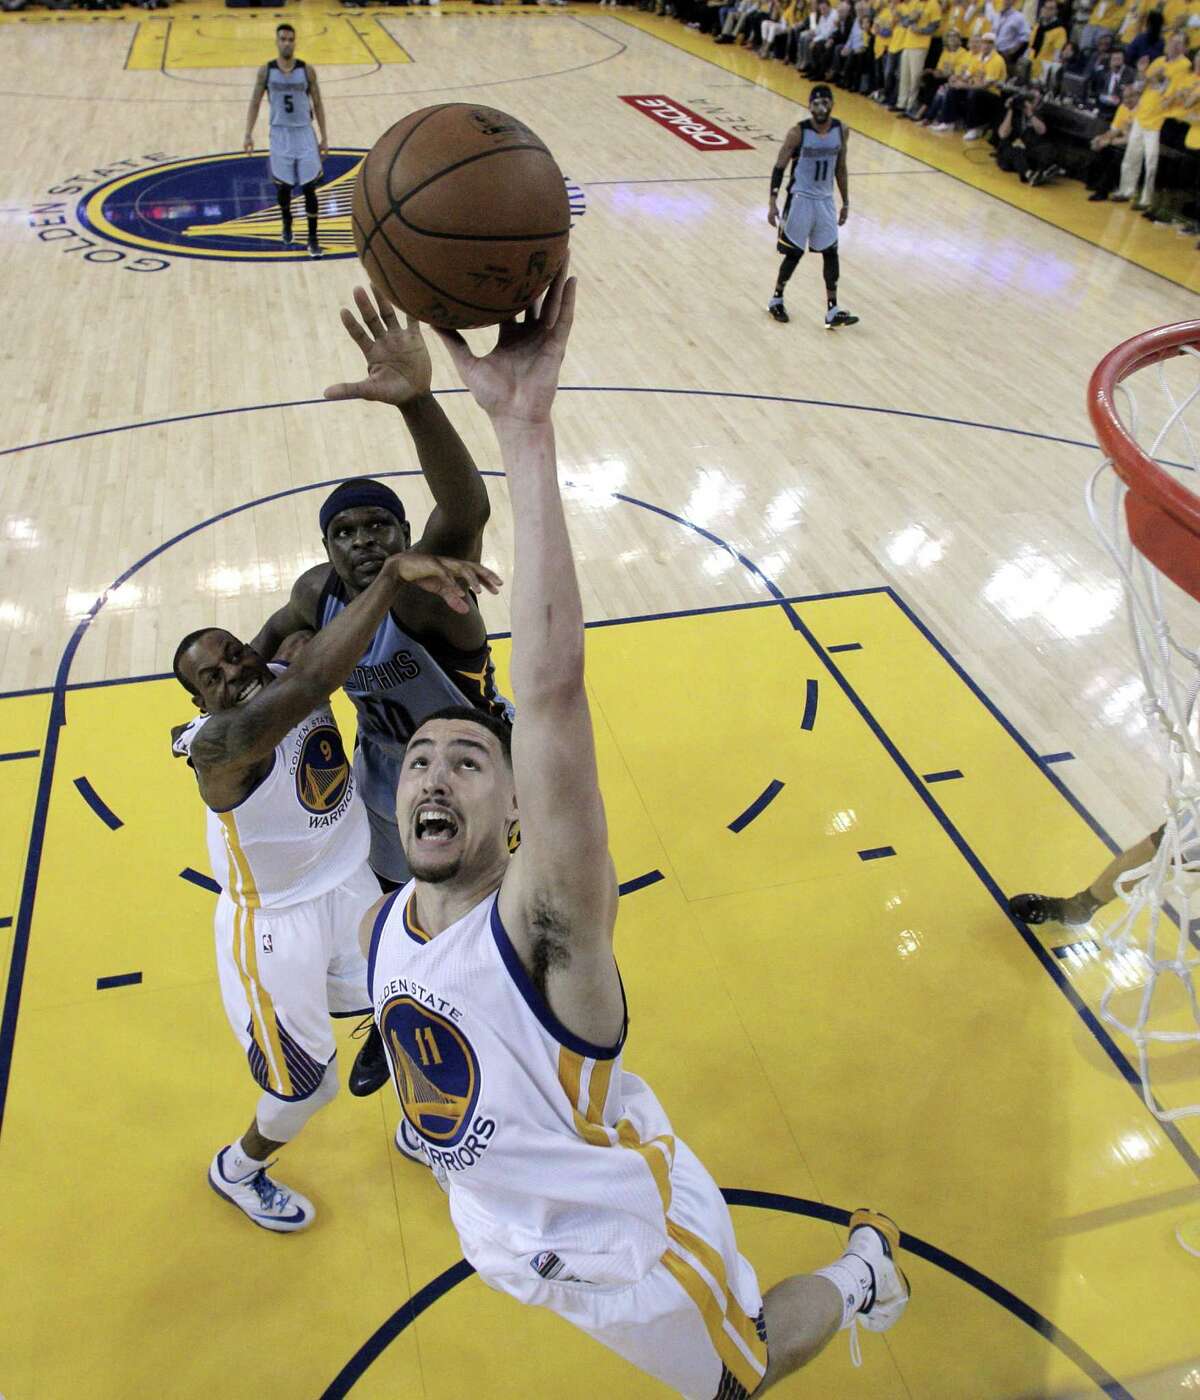 OAKLAND, CA - MAY 13: Klay Thompson #11 of the Golden State Warriors goes up for a rebound against the Memphis Grizzlies during Game Five of the Western Conference Semifinals of the NBA Playoffs at ORACLE Arena on May 13, 2015 in Oakland, California. NOTE TO USER: User expressly acknowledges and agrees that, by downloading and or using this photograph, User is consenting to the terms and conditions of the Getty Images License Agreement. (Photo by Carlos Gonzalez - Pool /Getty Images)